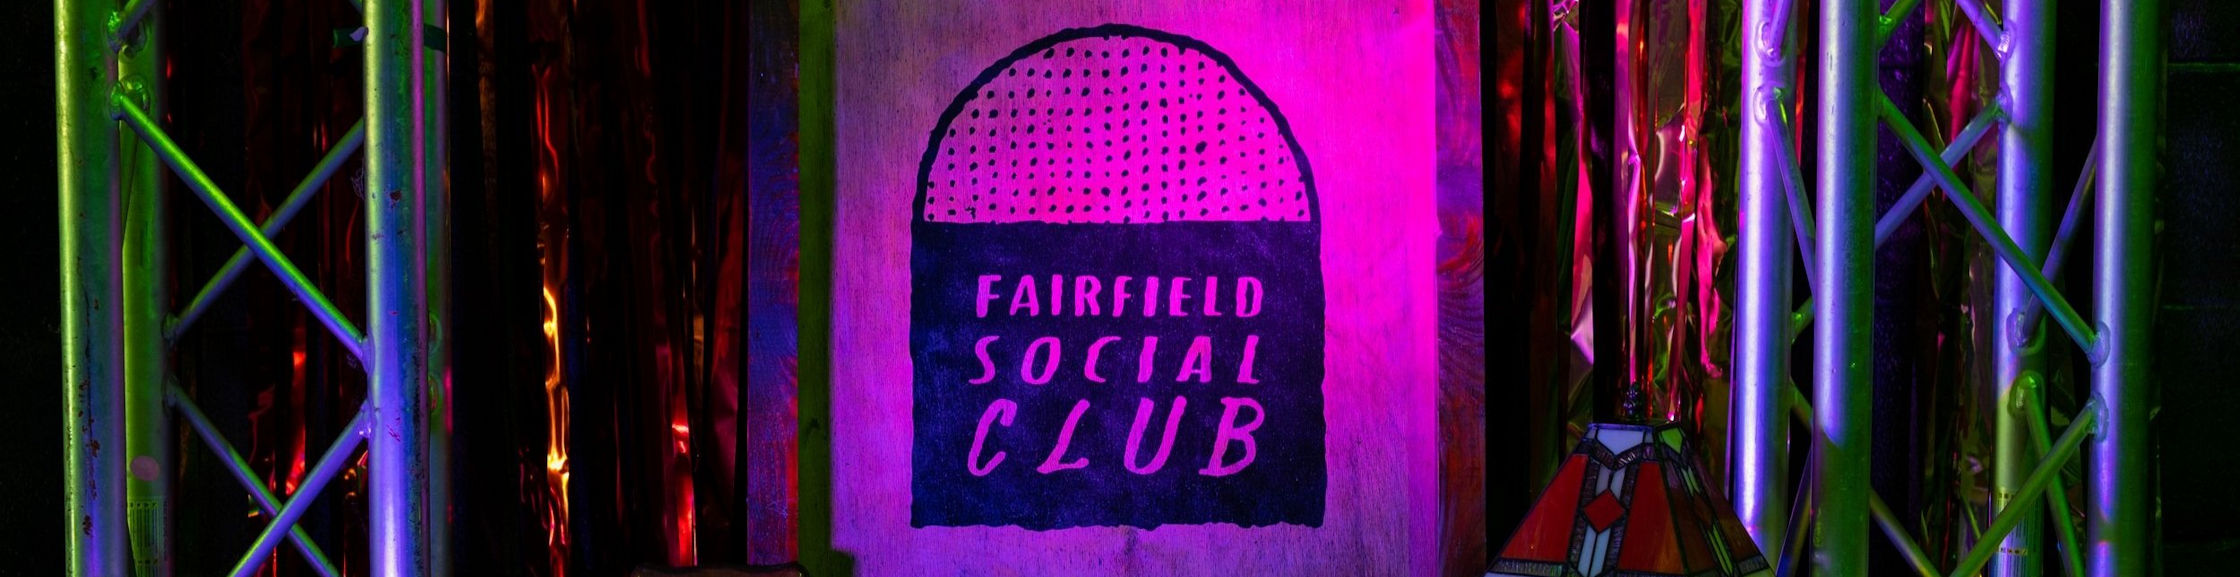 What's On at the Fairfield Social Club, Manchester